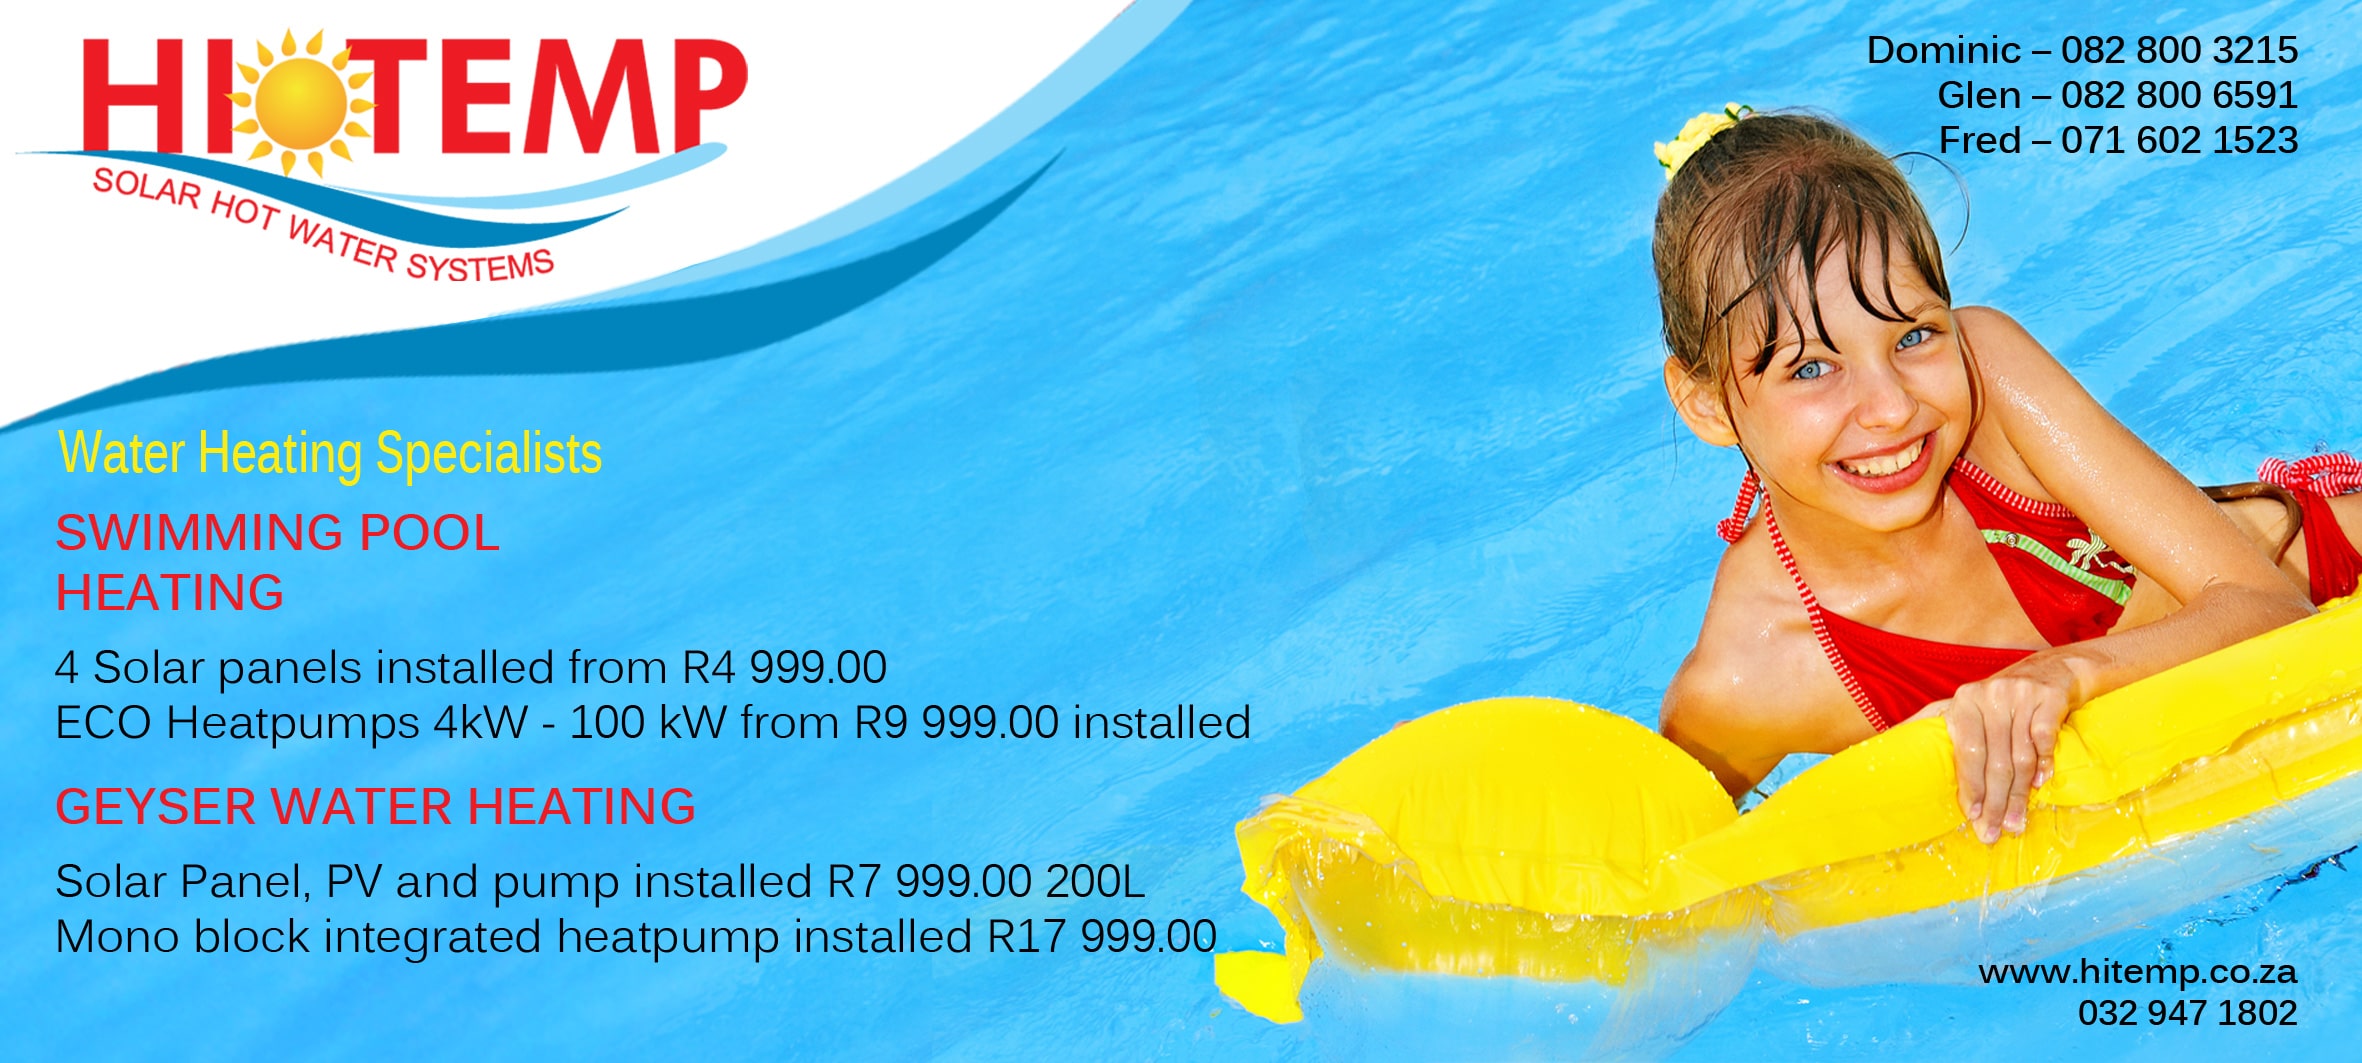 Swimming Pool Heating specials in Durban, Ballito